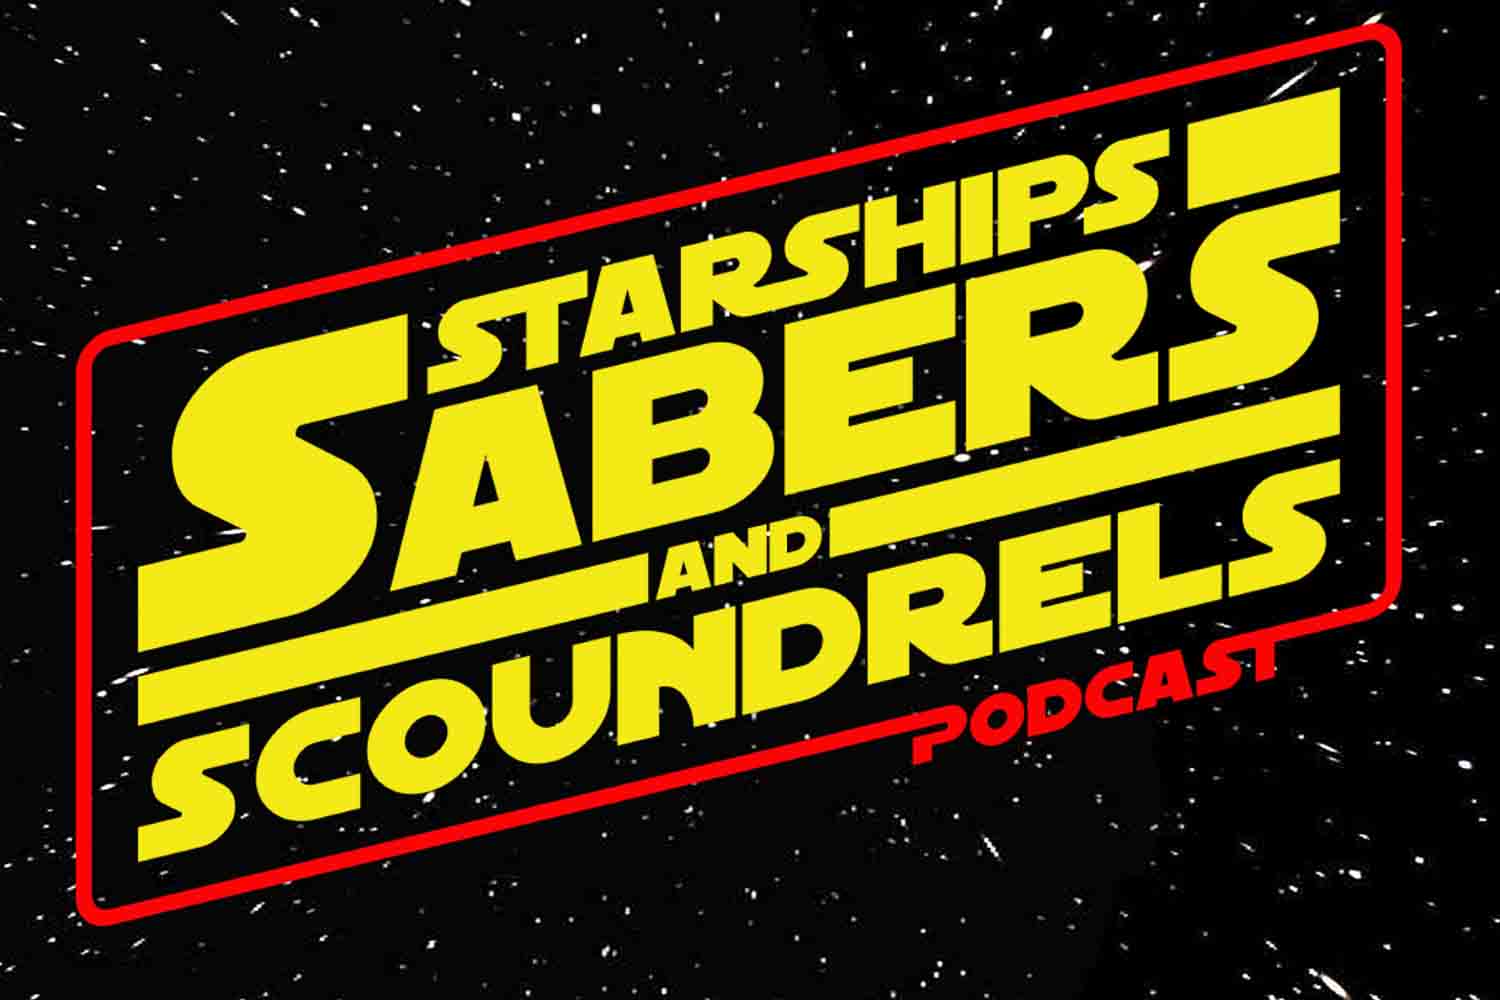 Starships Sabers and Scoundrels